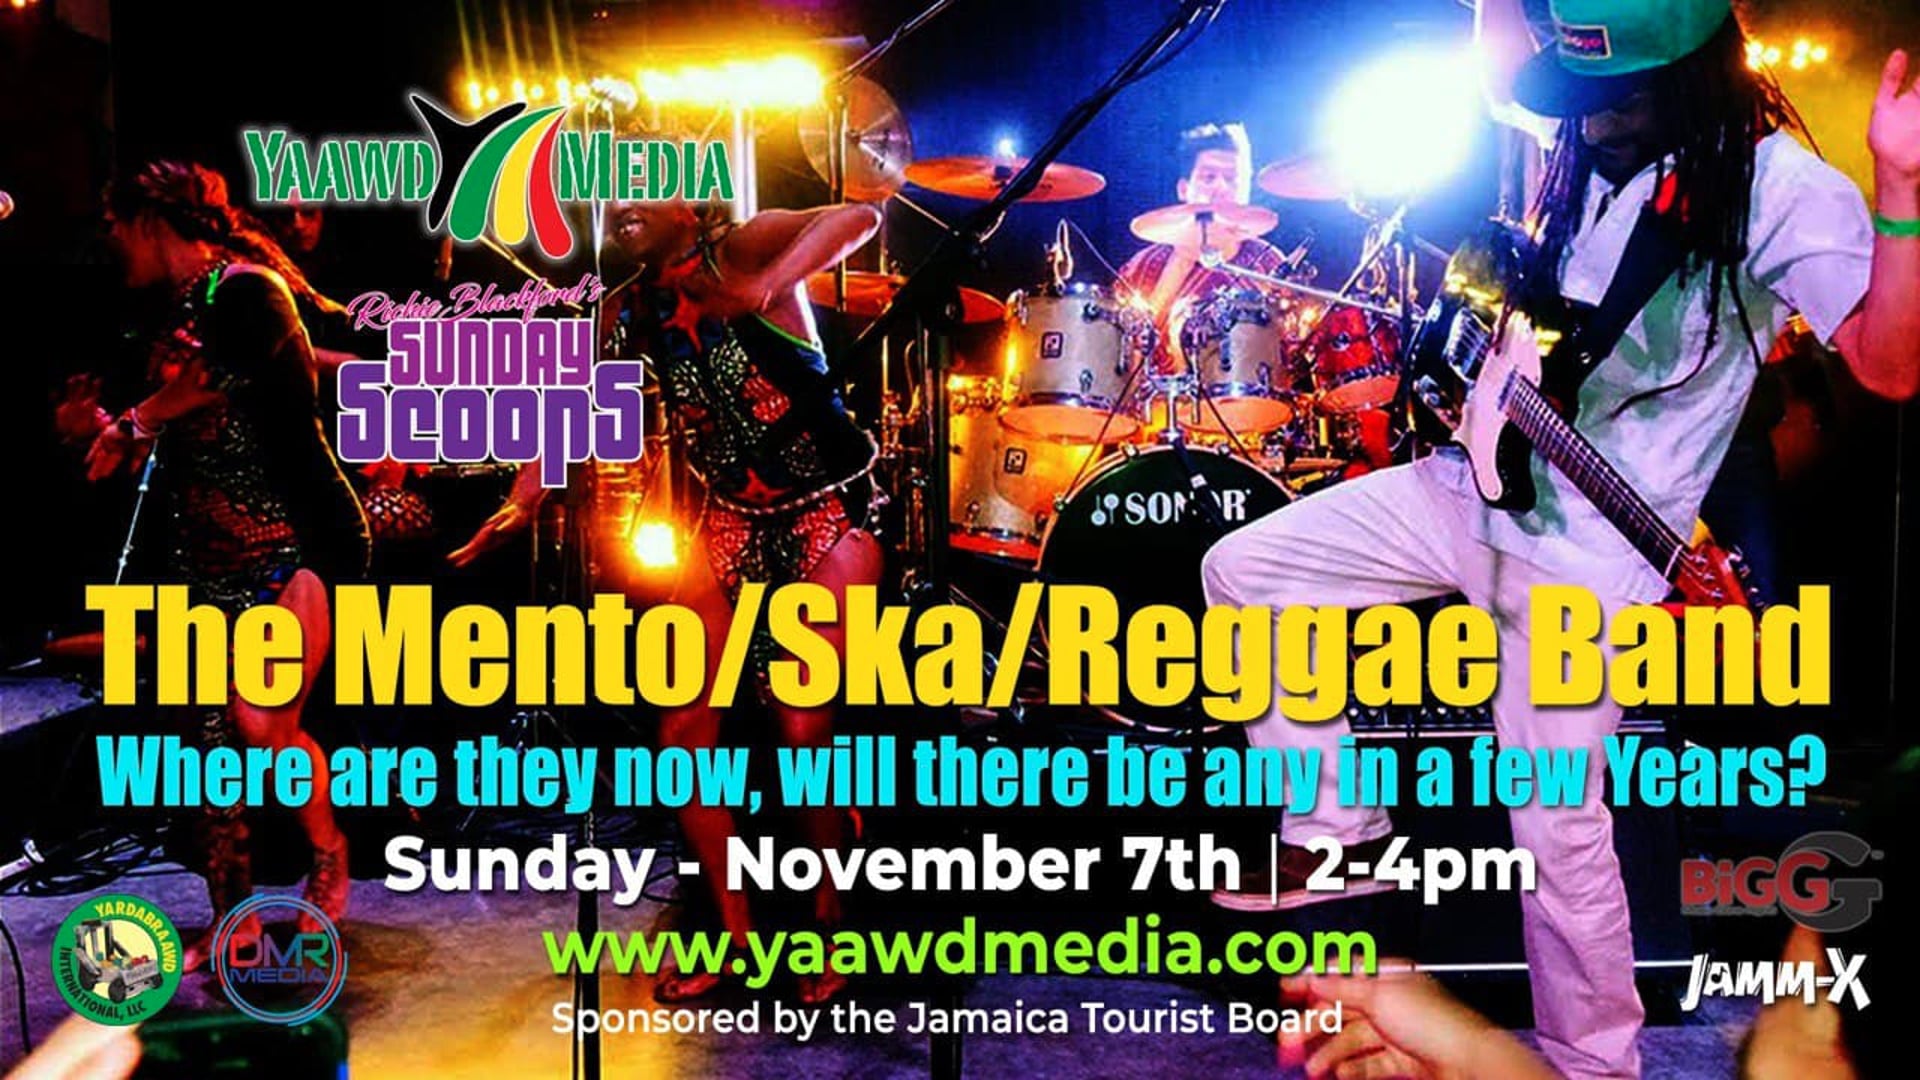 A Sunday Scoops Ska bands in Jamaica